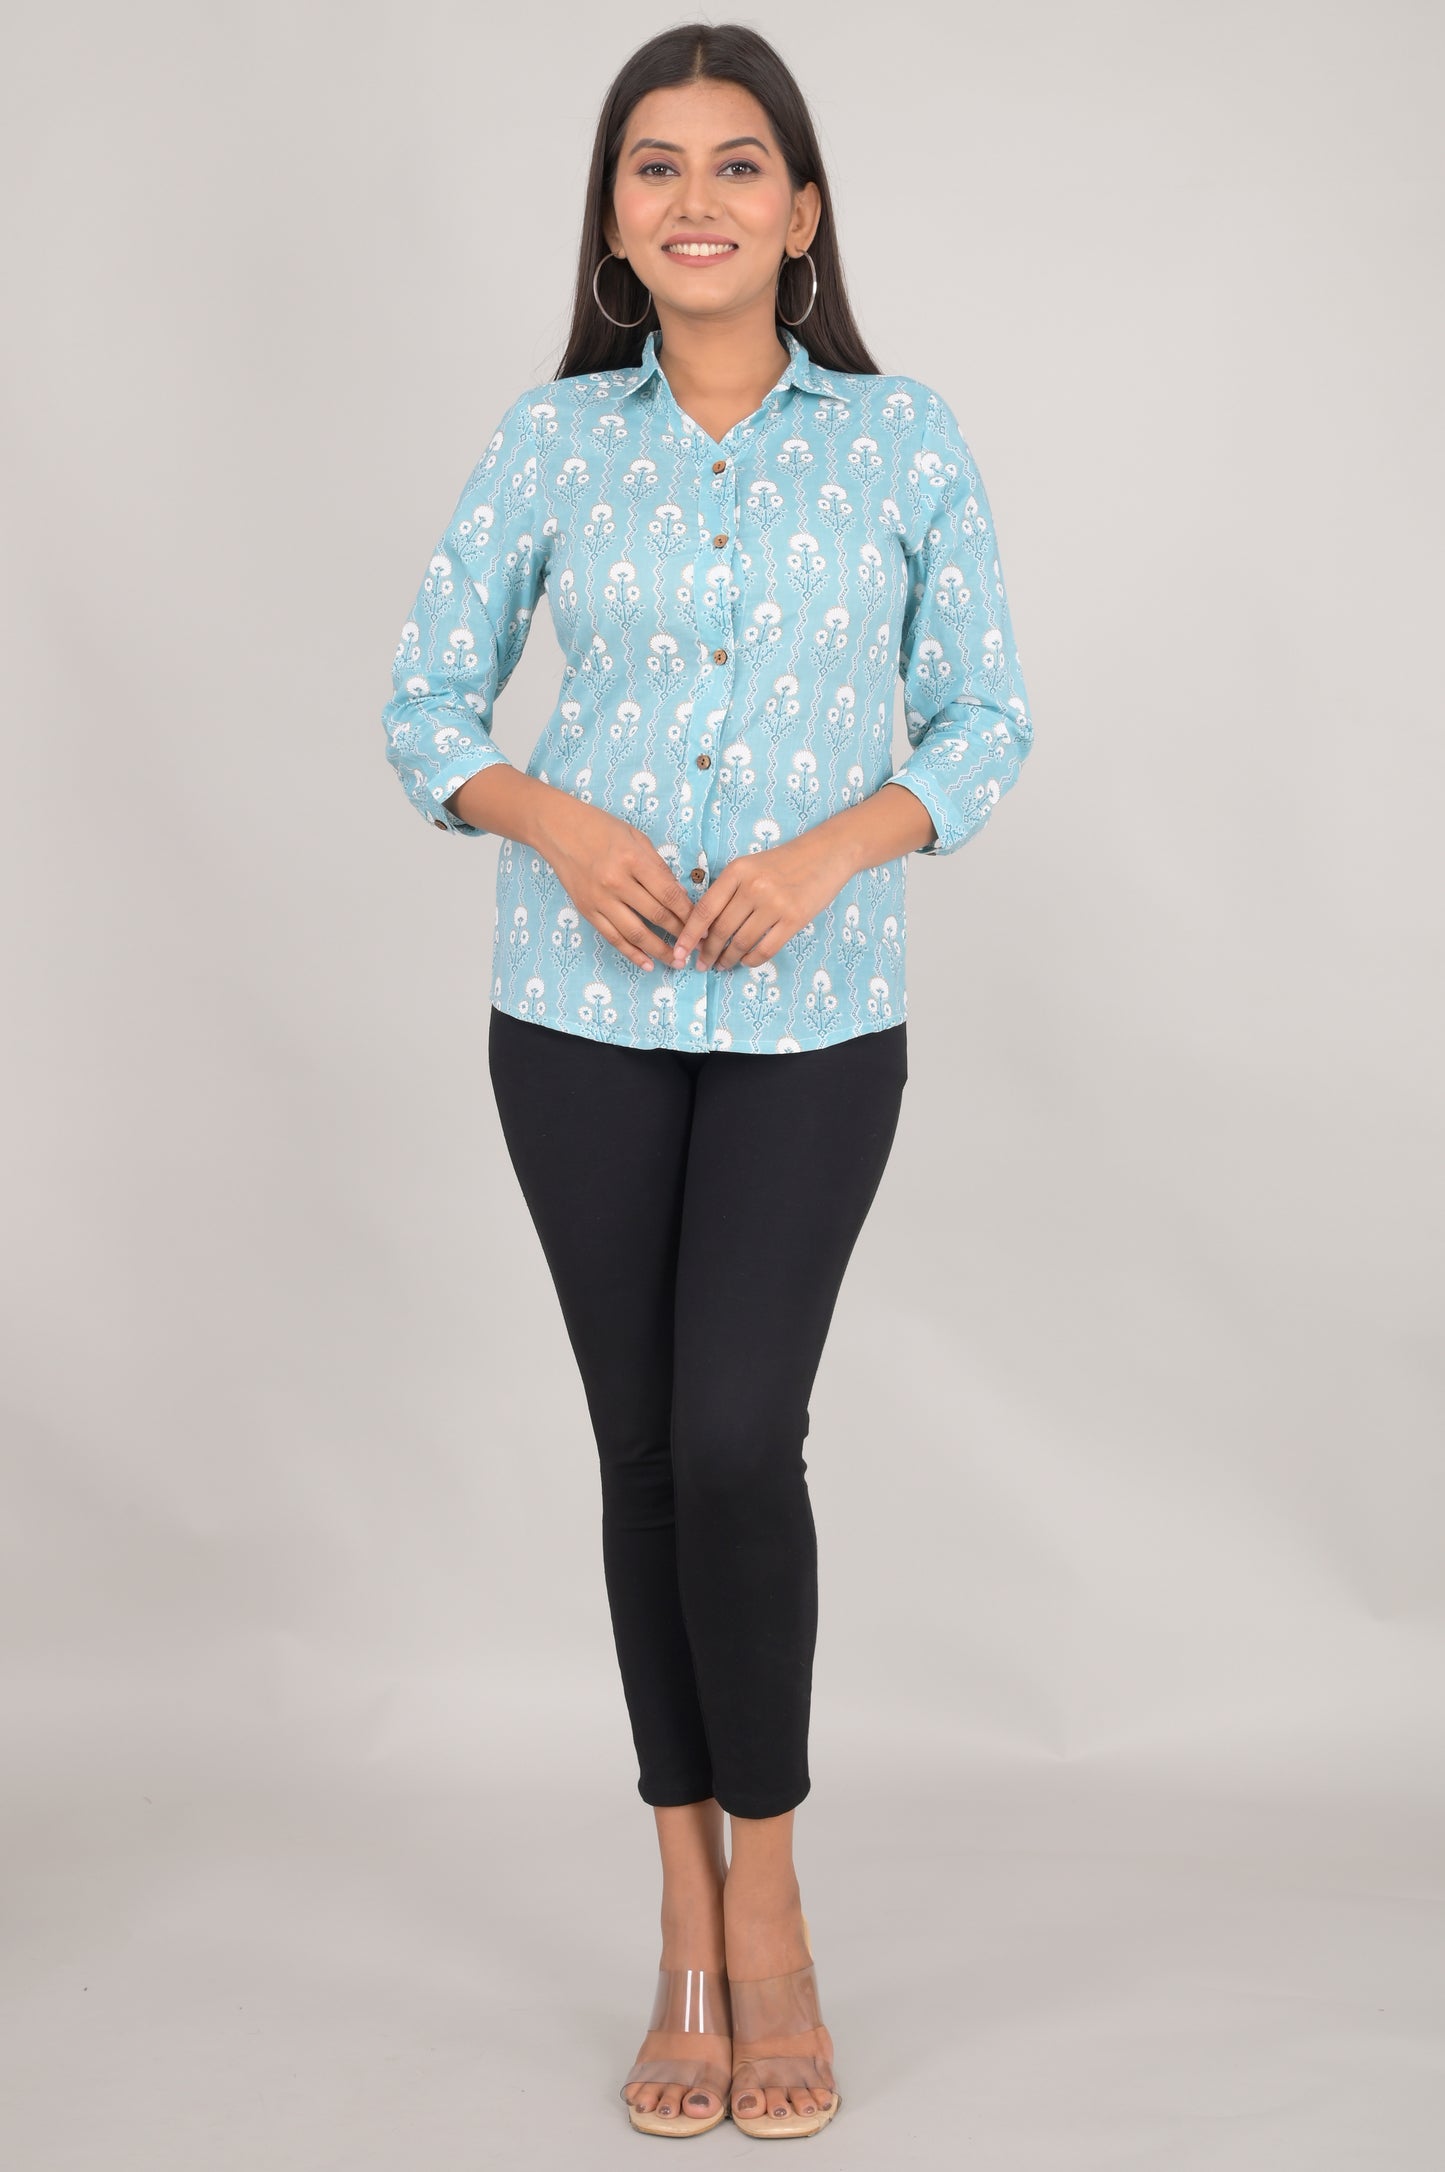 Women's Ethnic Floral Printed Shirts